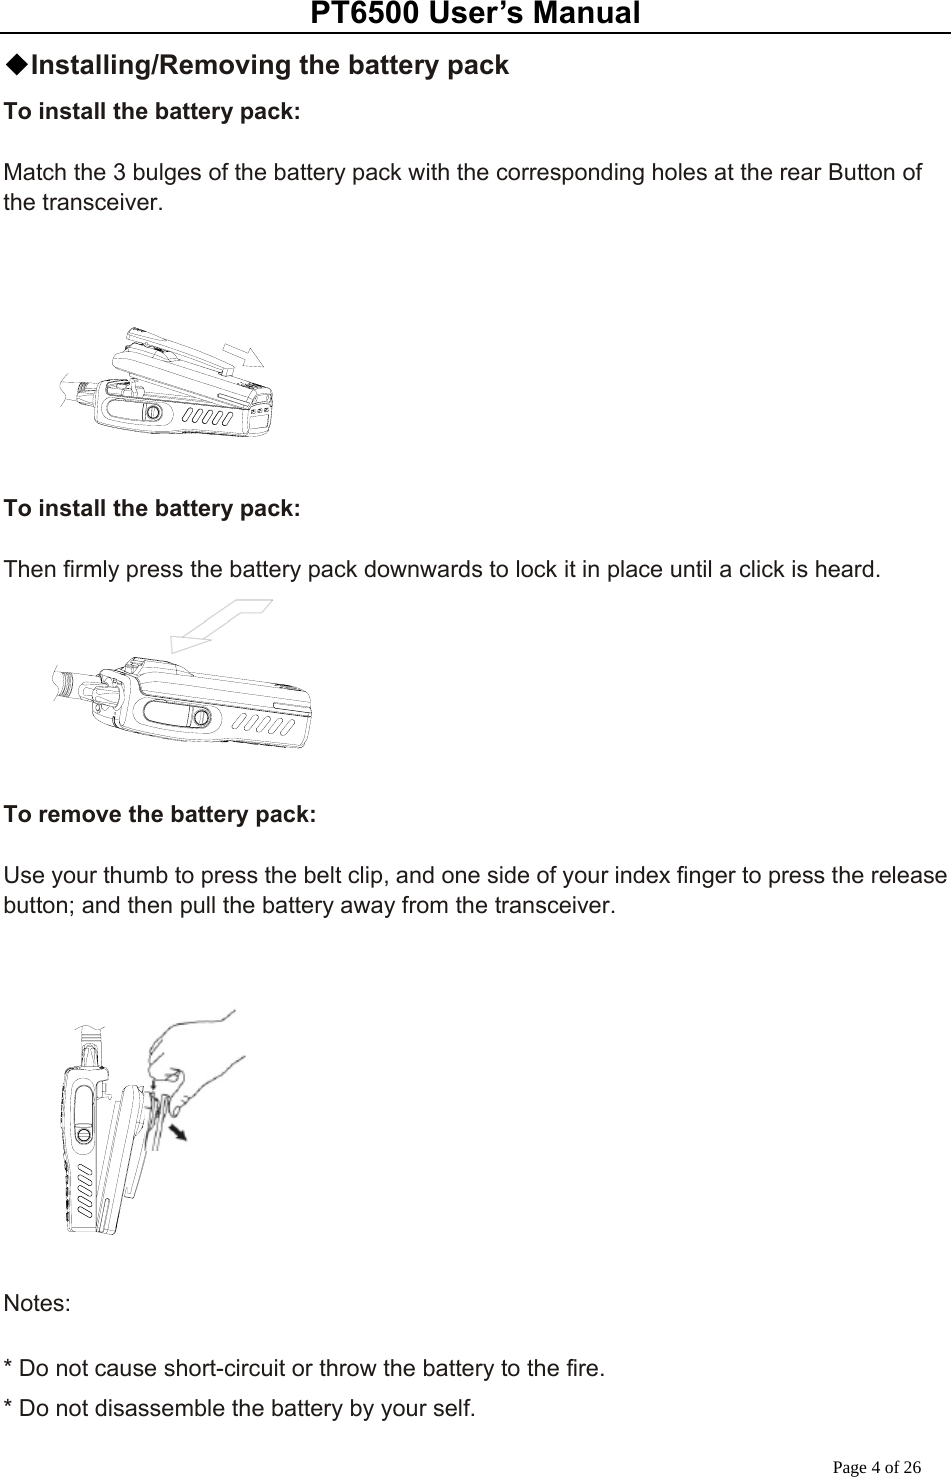 PT6500 User’s Manual Page 4 of 26 ◆Installing/Removing the battery pack To install the battery pack:  Match the 3 bulges of the battery pack with the corresponding holes at the rear Button of the transceiver.        To install the battery pack:  Then firmly press the battery pack downwards to lock it in place until a click is heard.       To remove the battery pack:  Use your thumb to press the belt clip, and one side of your index finger to press the release button; and then pull the battery away from the transceiver.      Notes:  * Do not cause short-circuit or throw the battery to the fire. * Do not disassemble the battery by your self. 